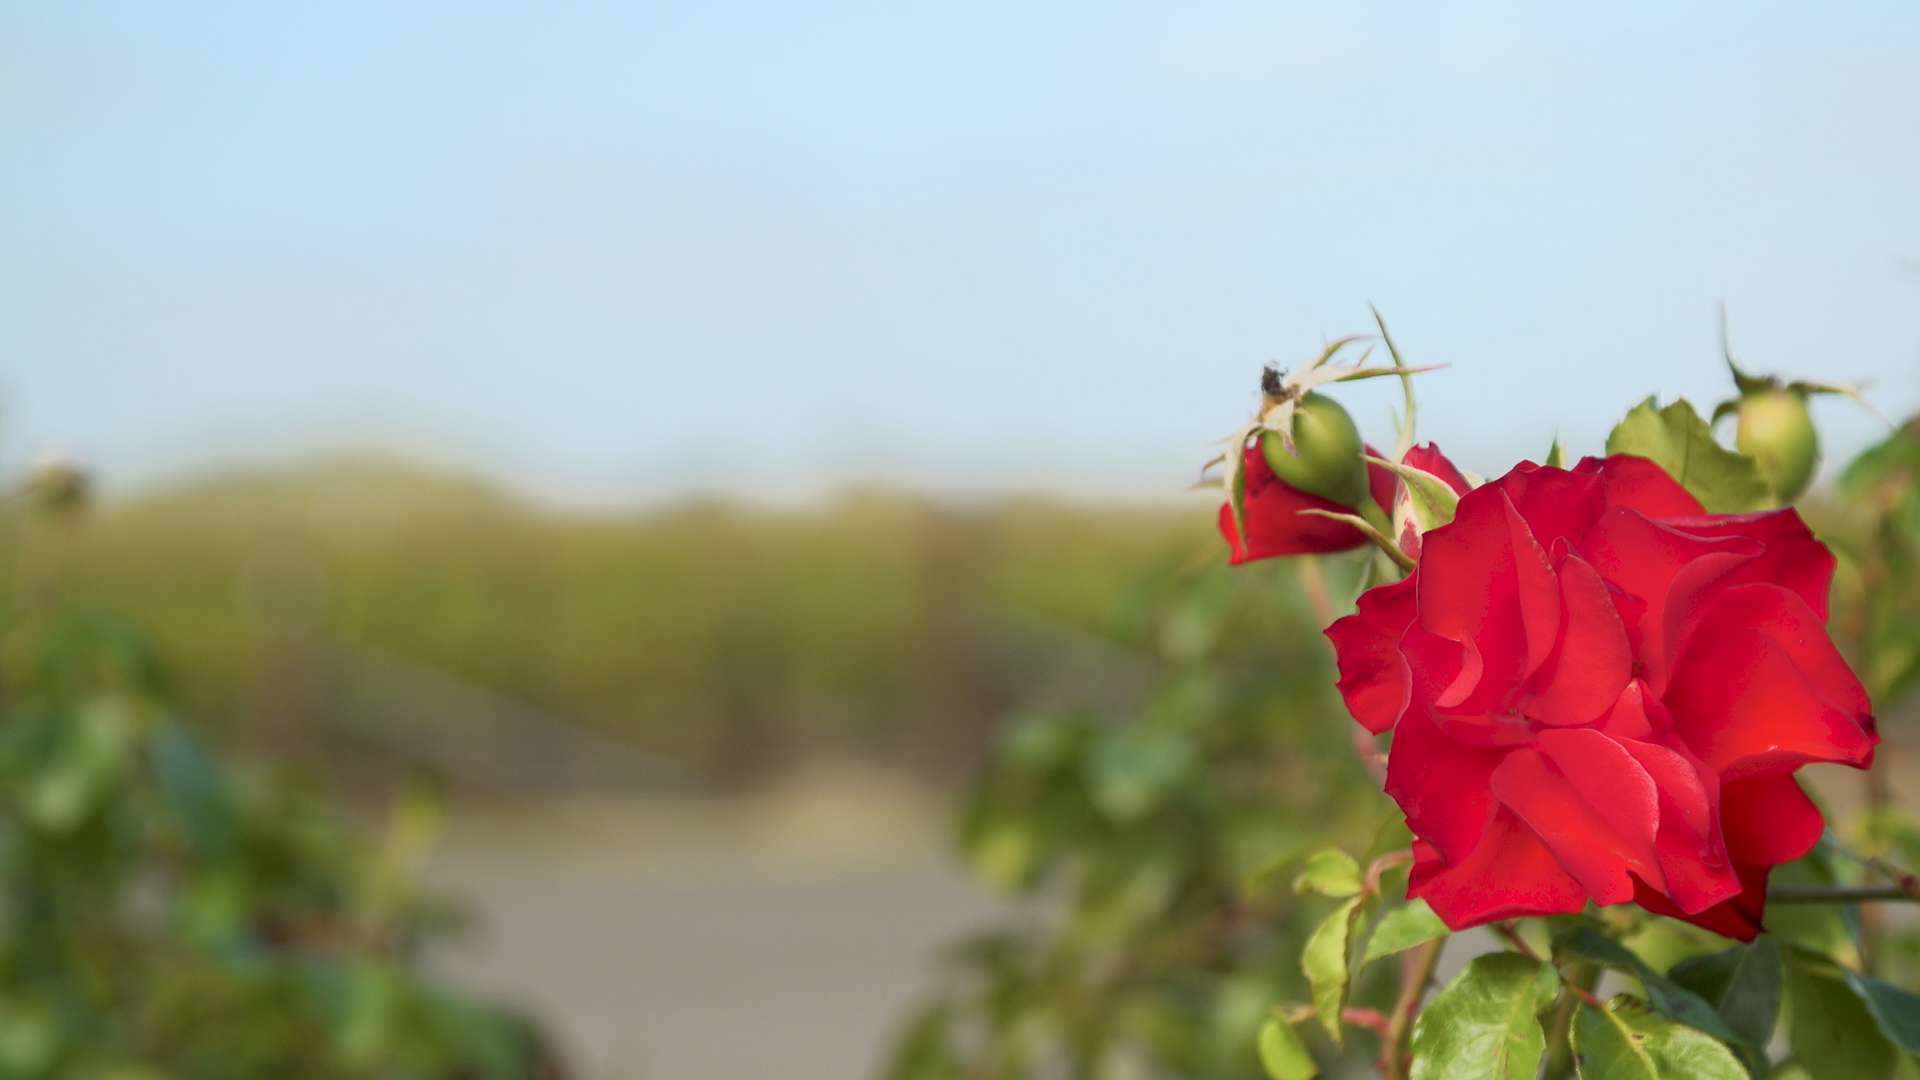 Grapevines in background shifting focus to red rose in foreground at australian winery